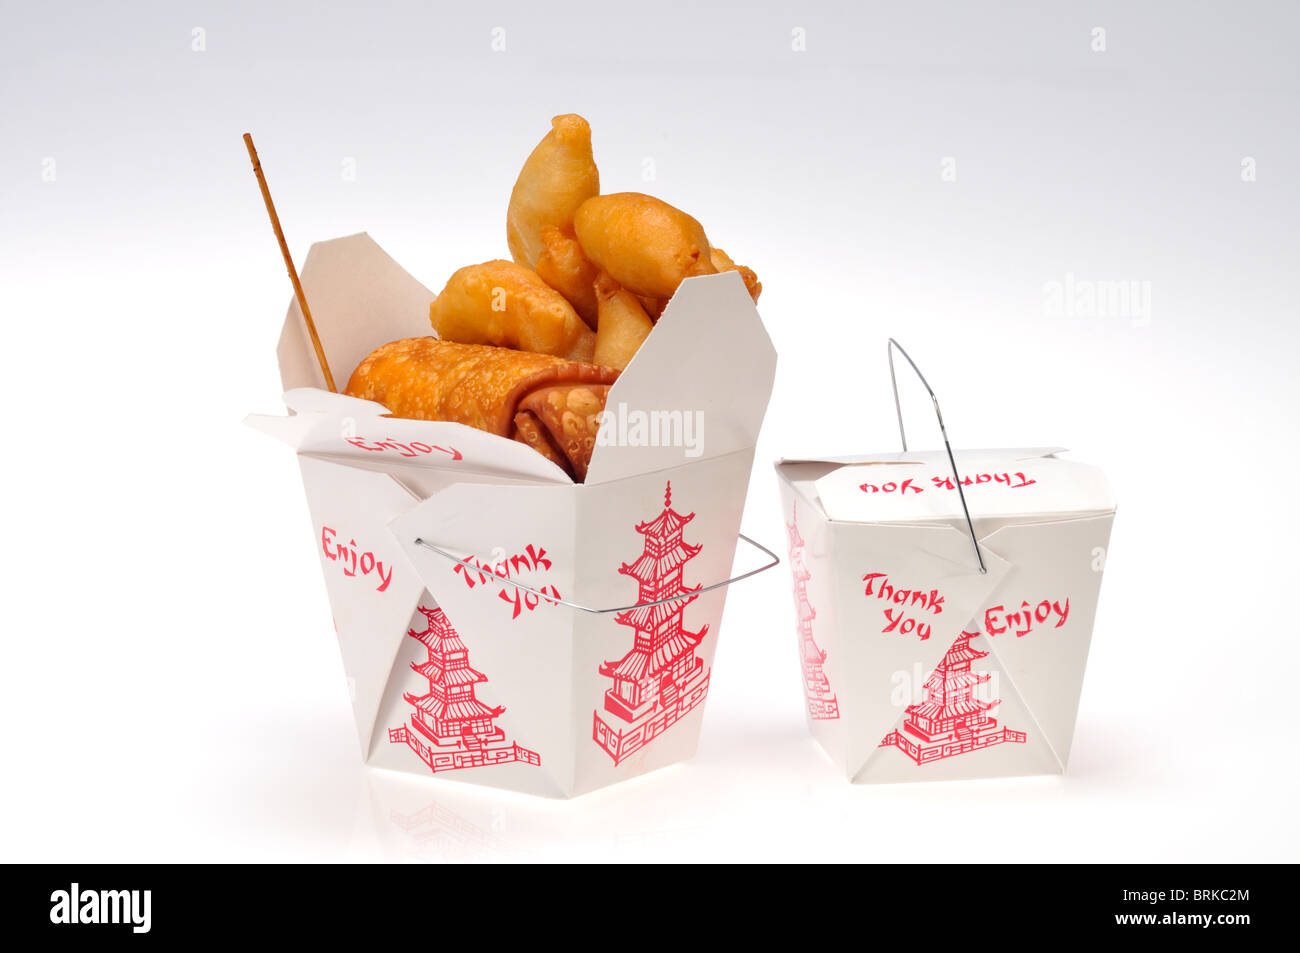 2 cartons of take away  chinese food, one open overflowing with chicken fingers & egg roll food the other closed on white background isolated. Stock Photo